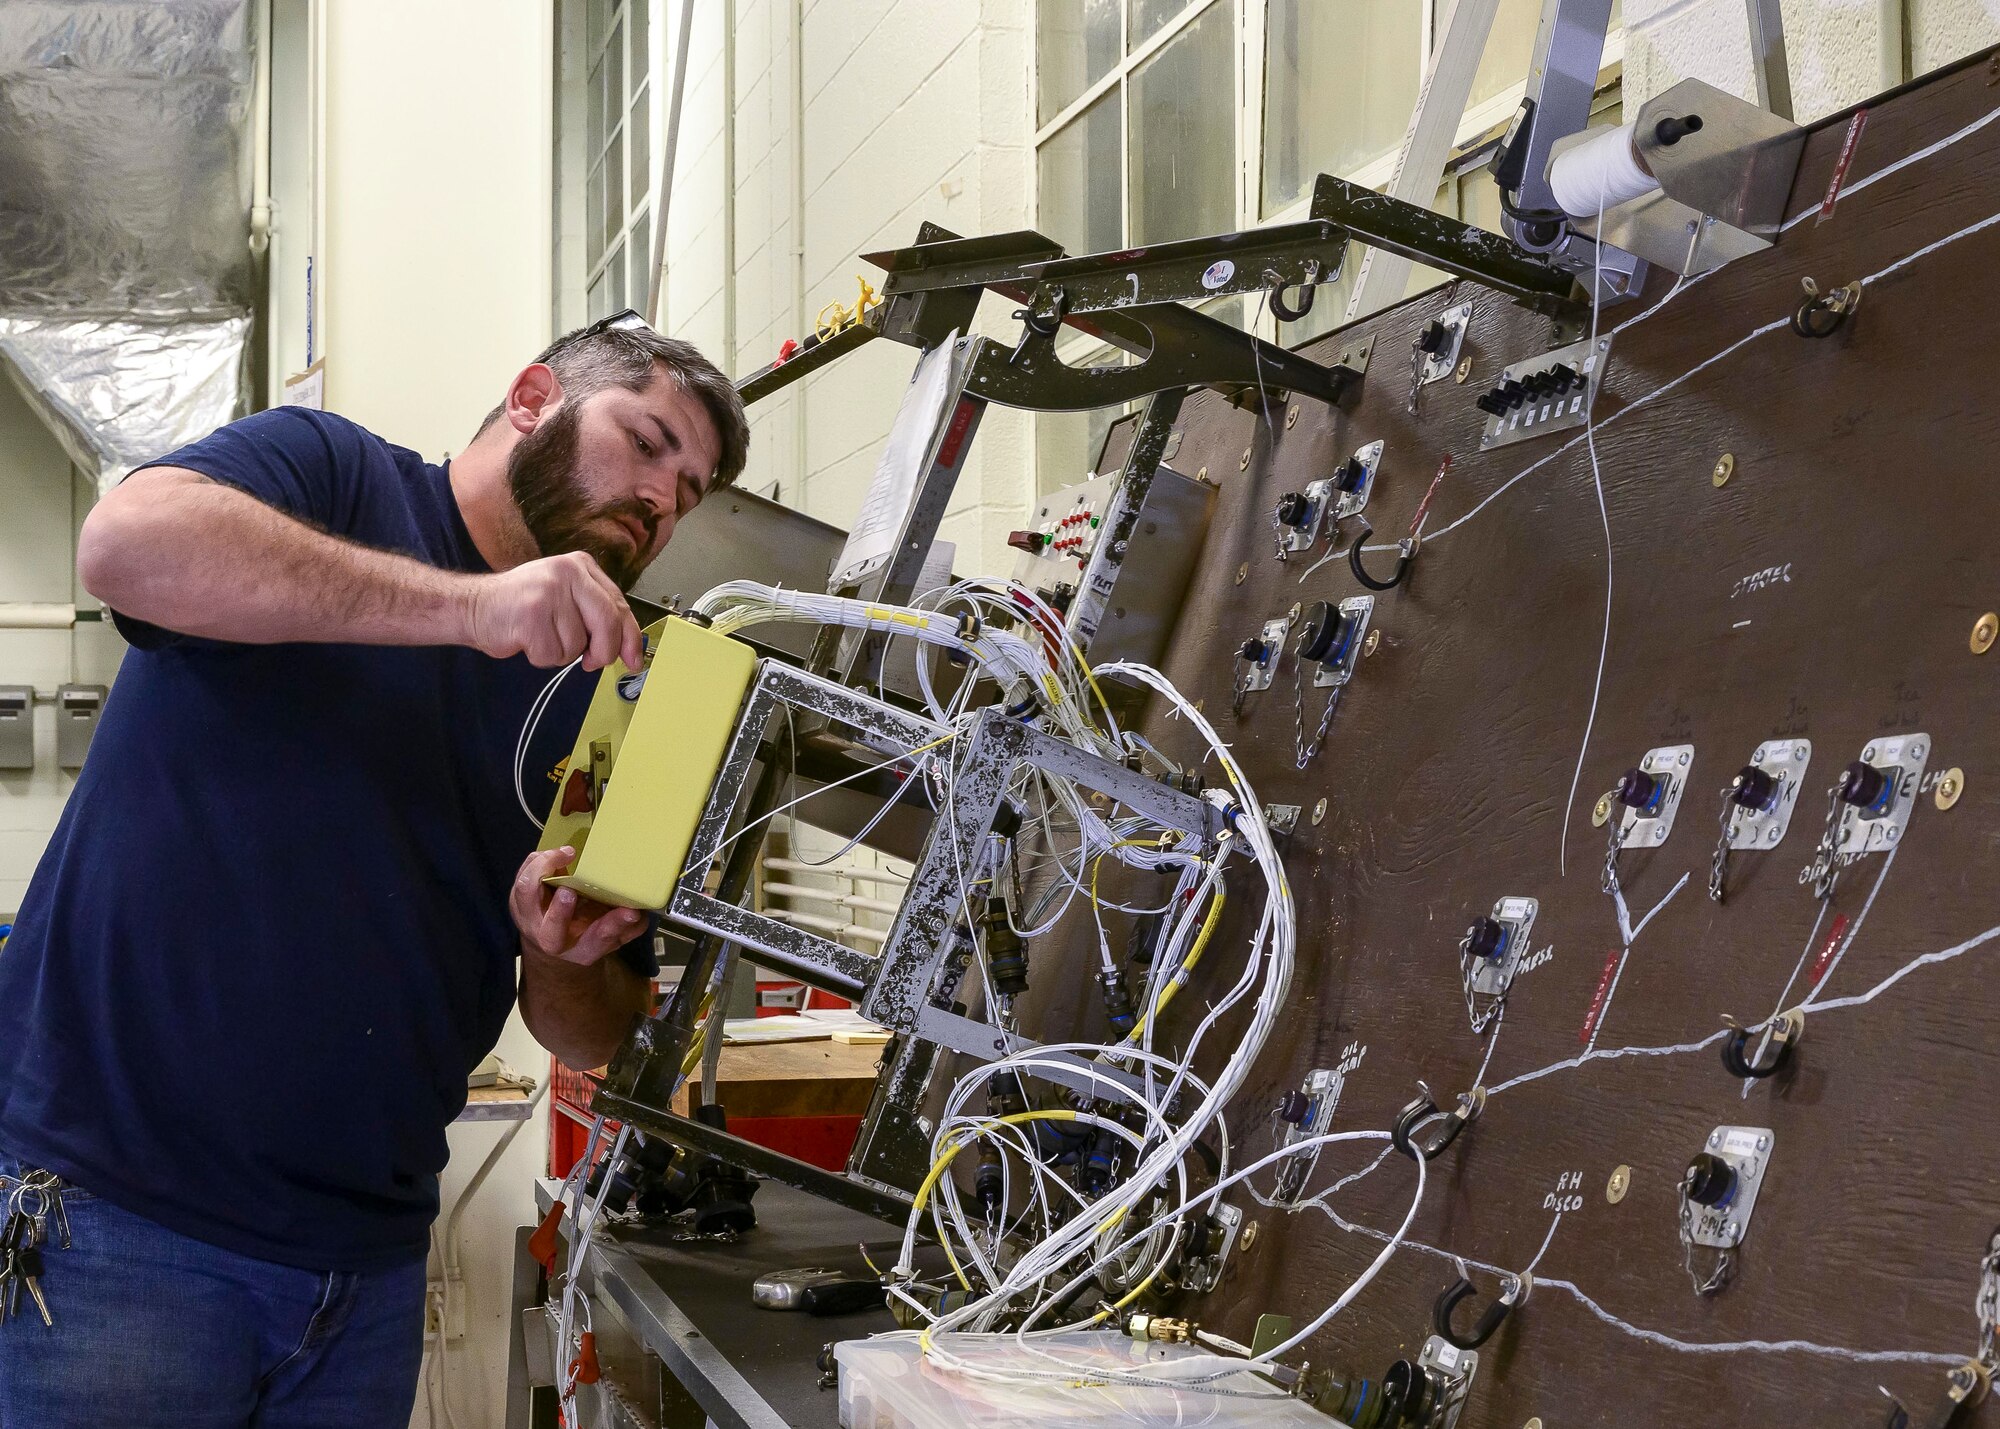 Dave Embler, Contract Field Team member, assembles and tests the wiring harness for a refurbished Quick Engine Change kit QEC on a wiring board prior to installation, Dec. 29, 2020, at Little Rock Air Force Base, Ark. The facility produces all C-130H Hercules 3.5 engine modifications and 54H60-117 propeller overhauls for Air Force Reserve Command and various Air National Guard units. (U.S. Air Force Reserve photo by Maj. Ashley Walker)